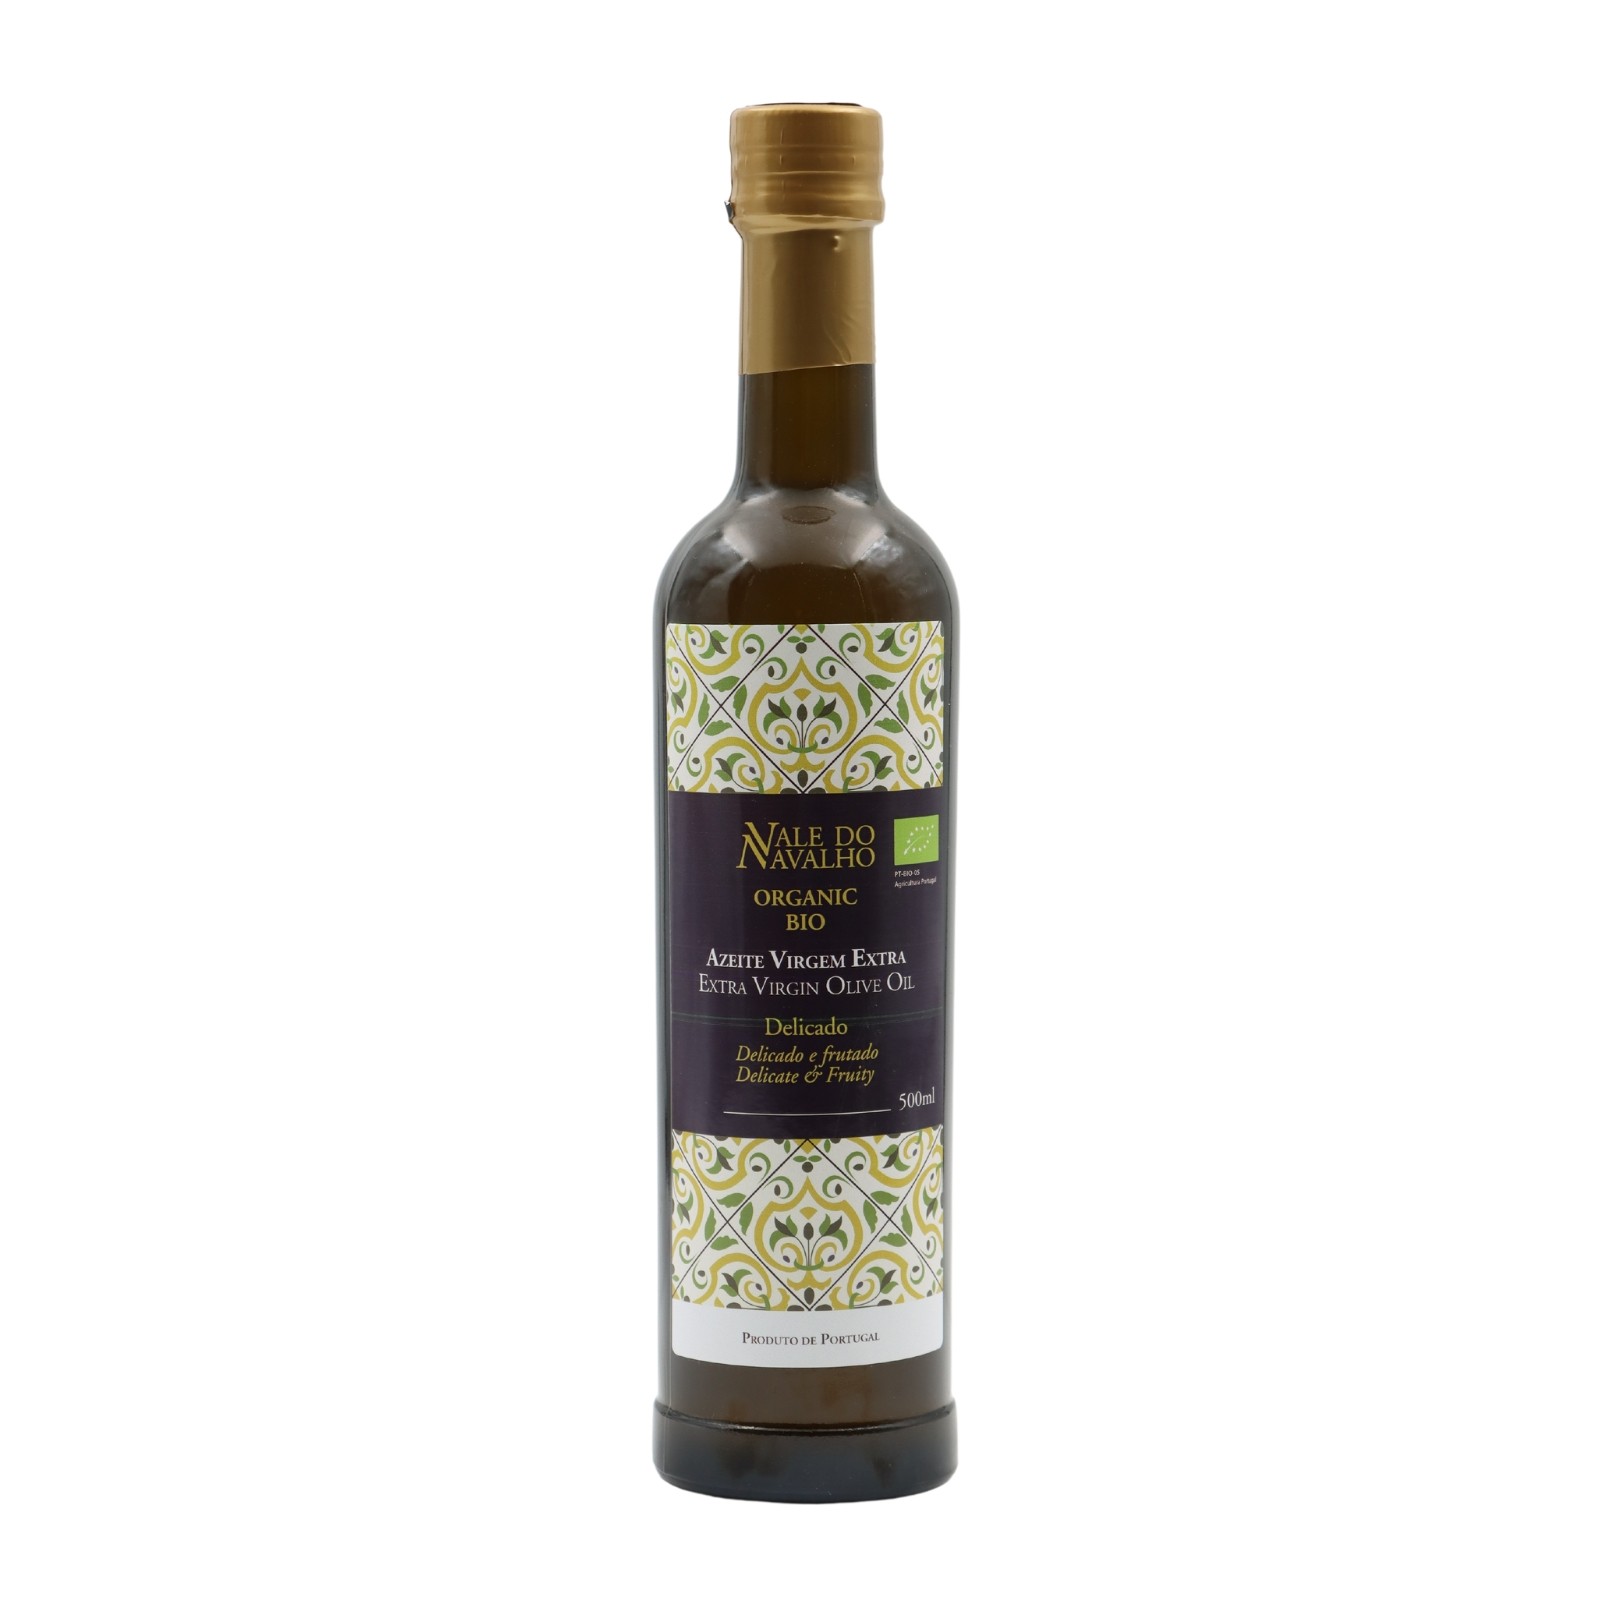 Vale do Navalho Delicate Huile d'Olive Extra Vierge